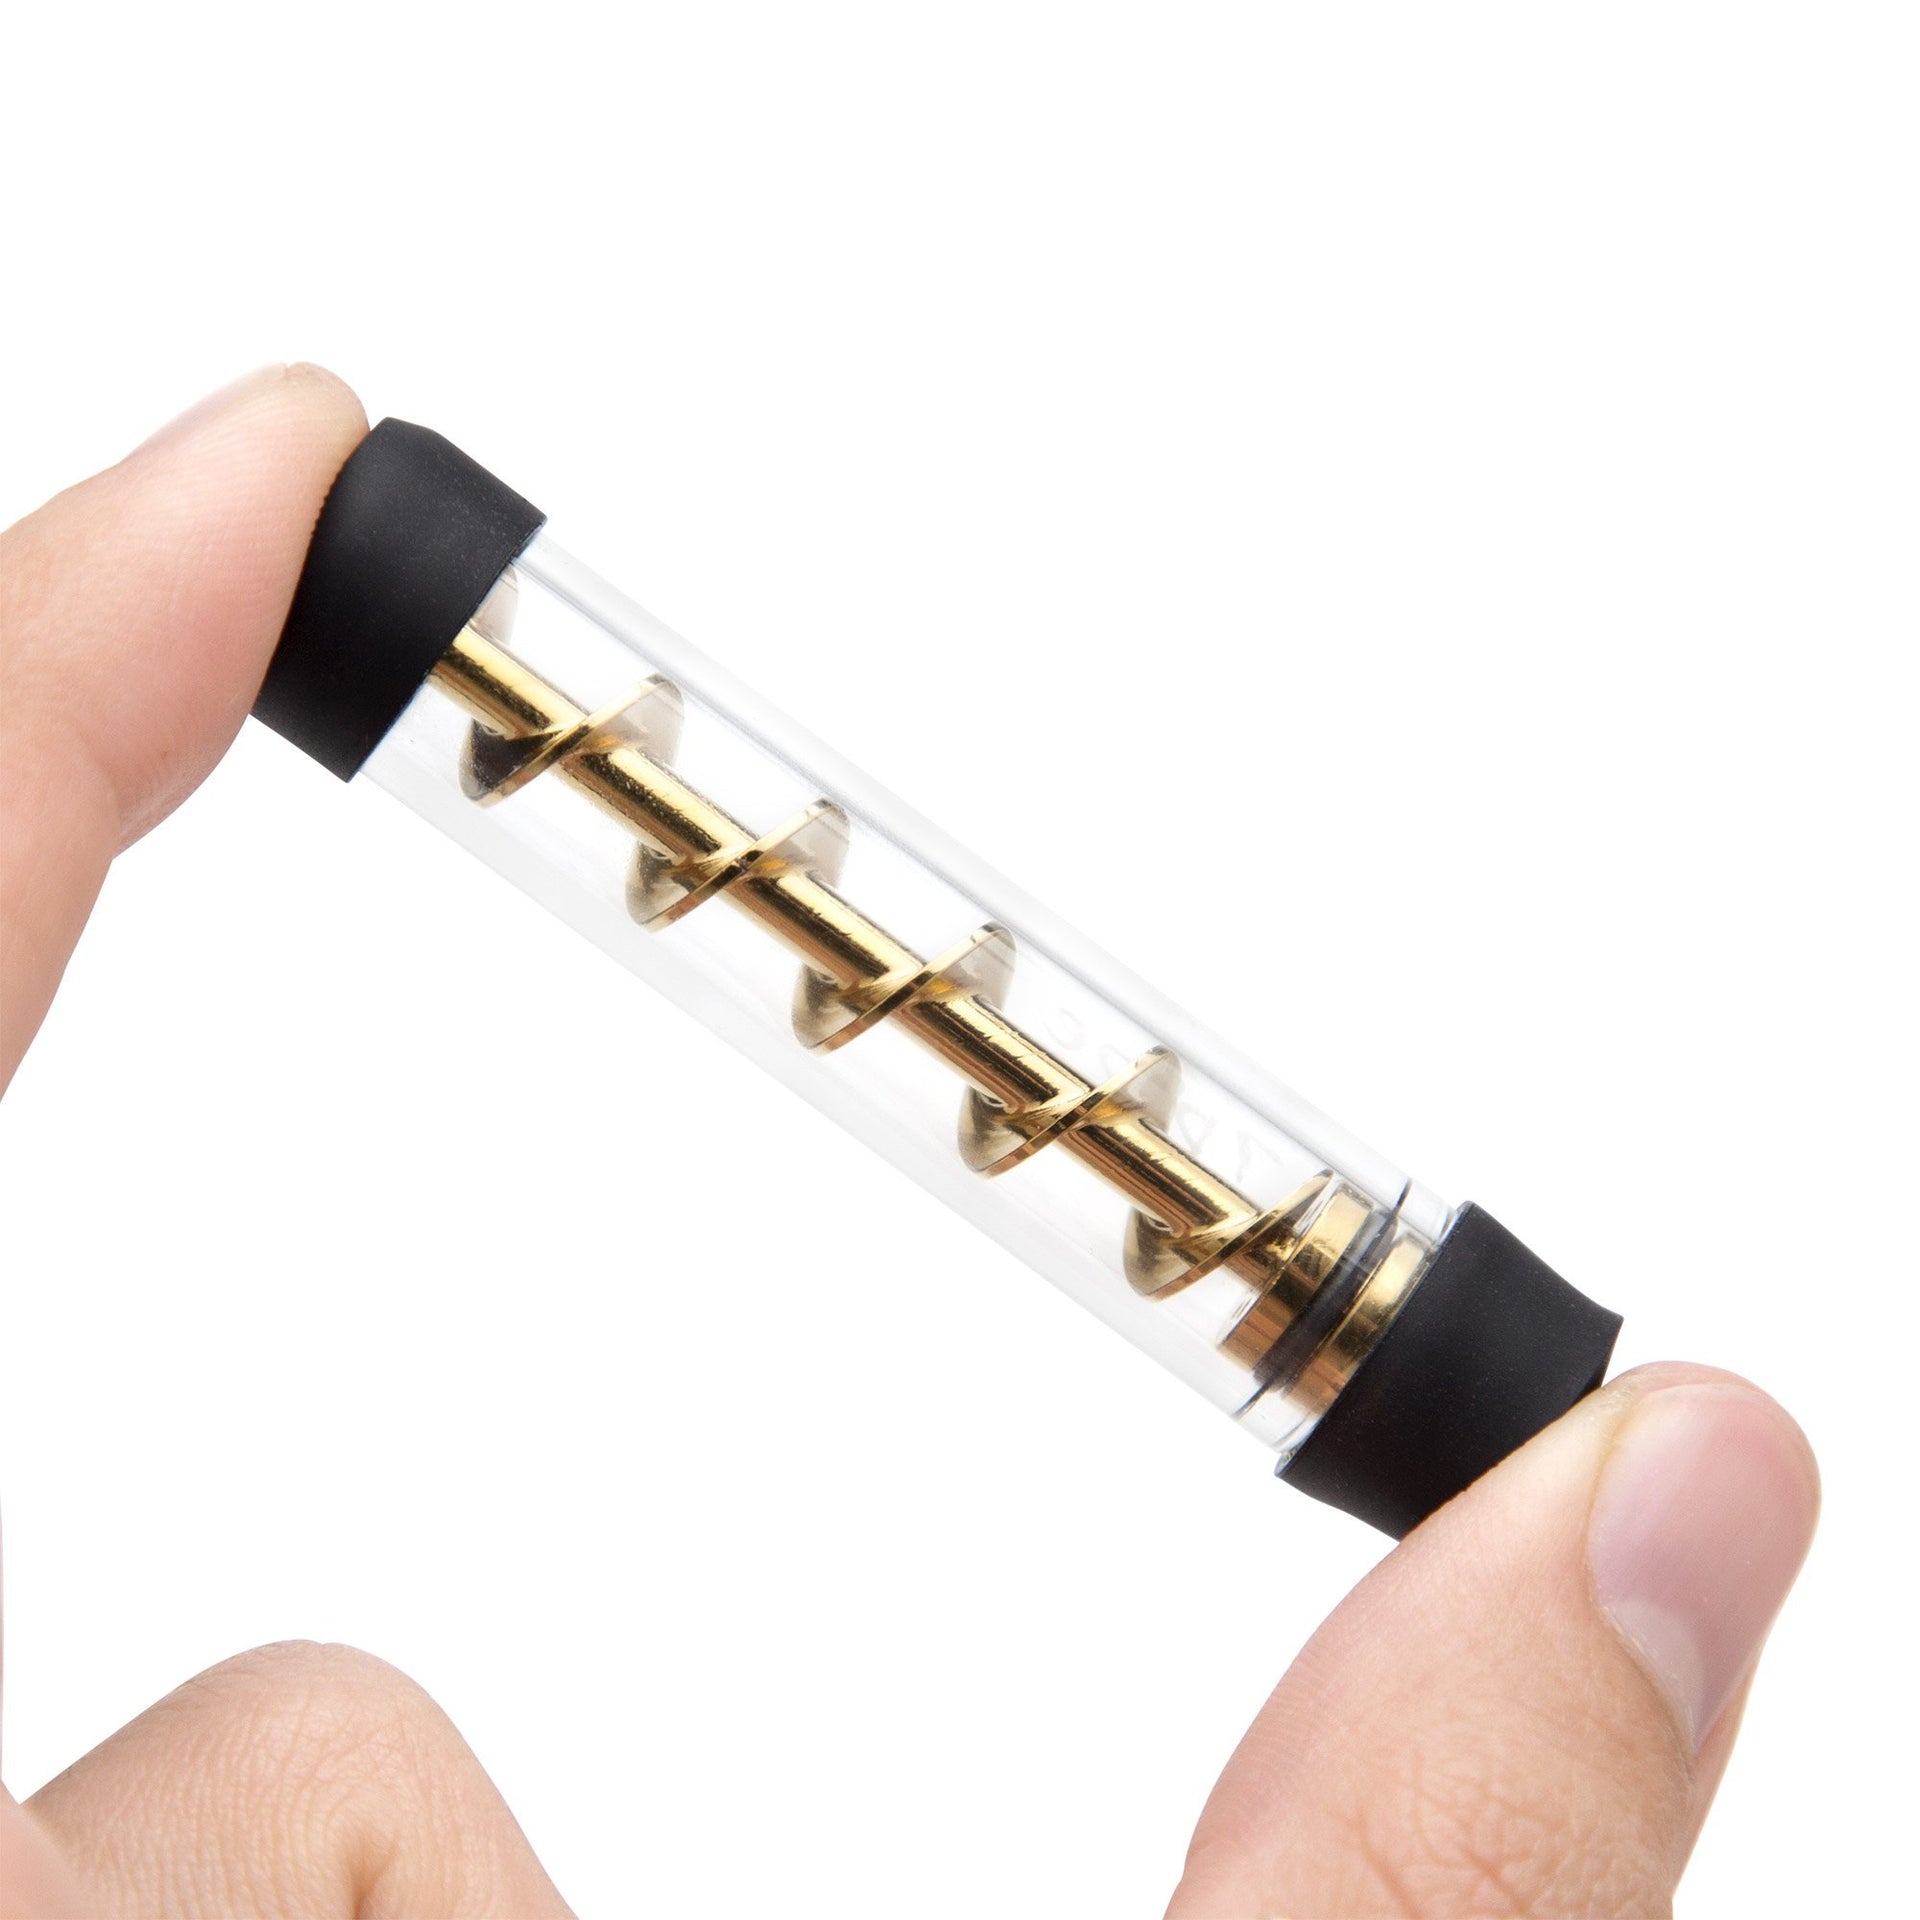 7 Pipe Twisty Mini Glass Blunt - 420 Science - The most trusted online smoke shop.